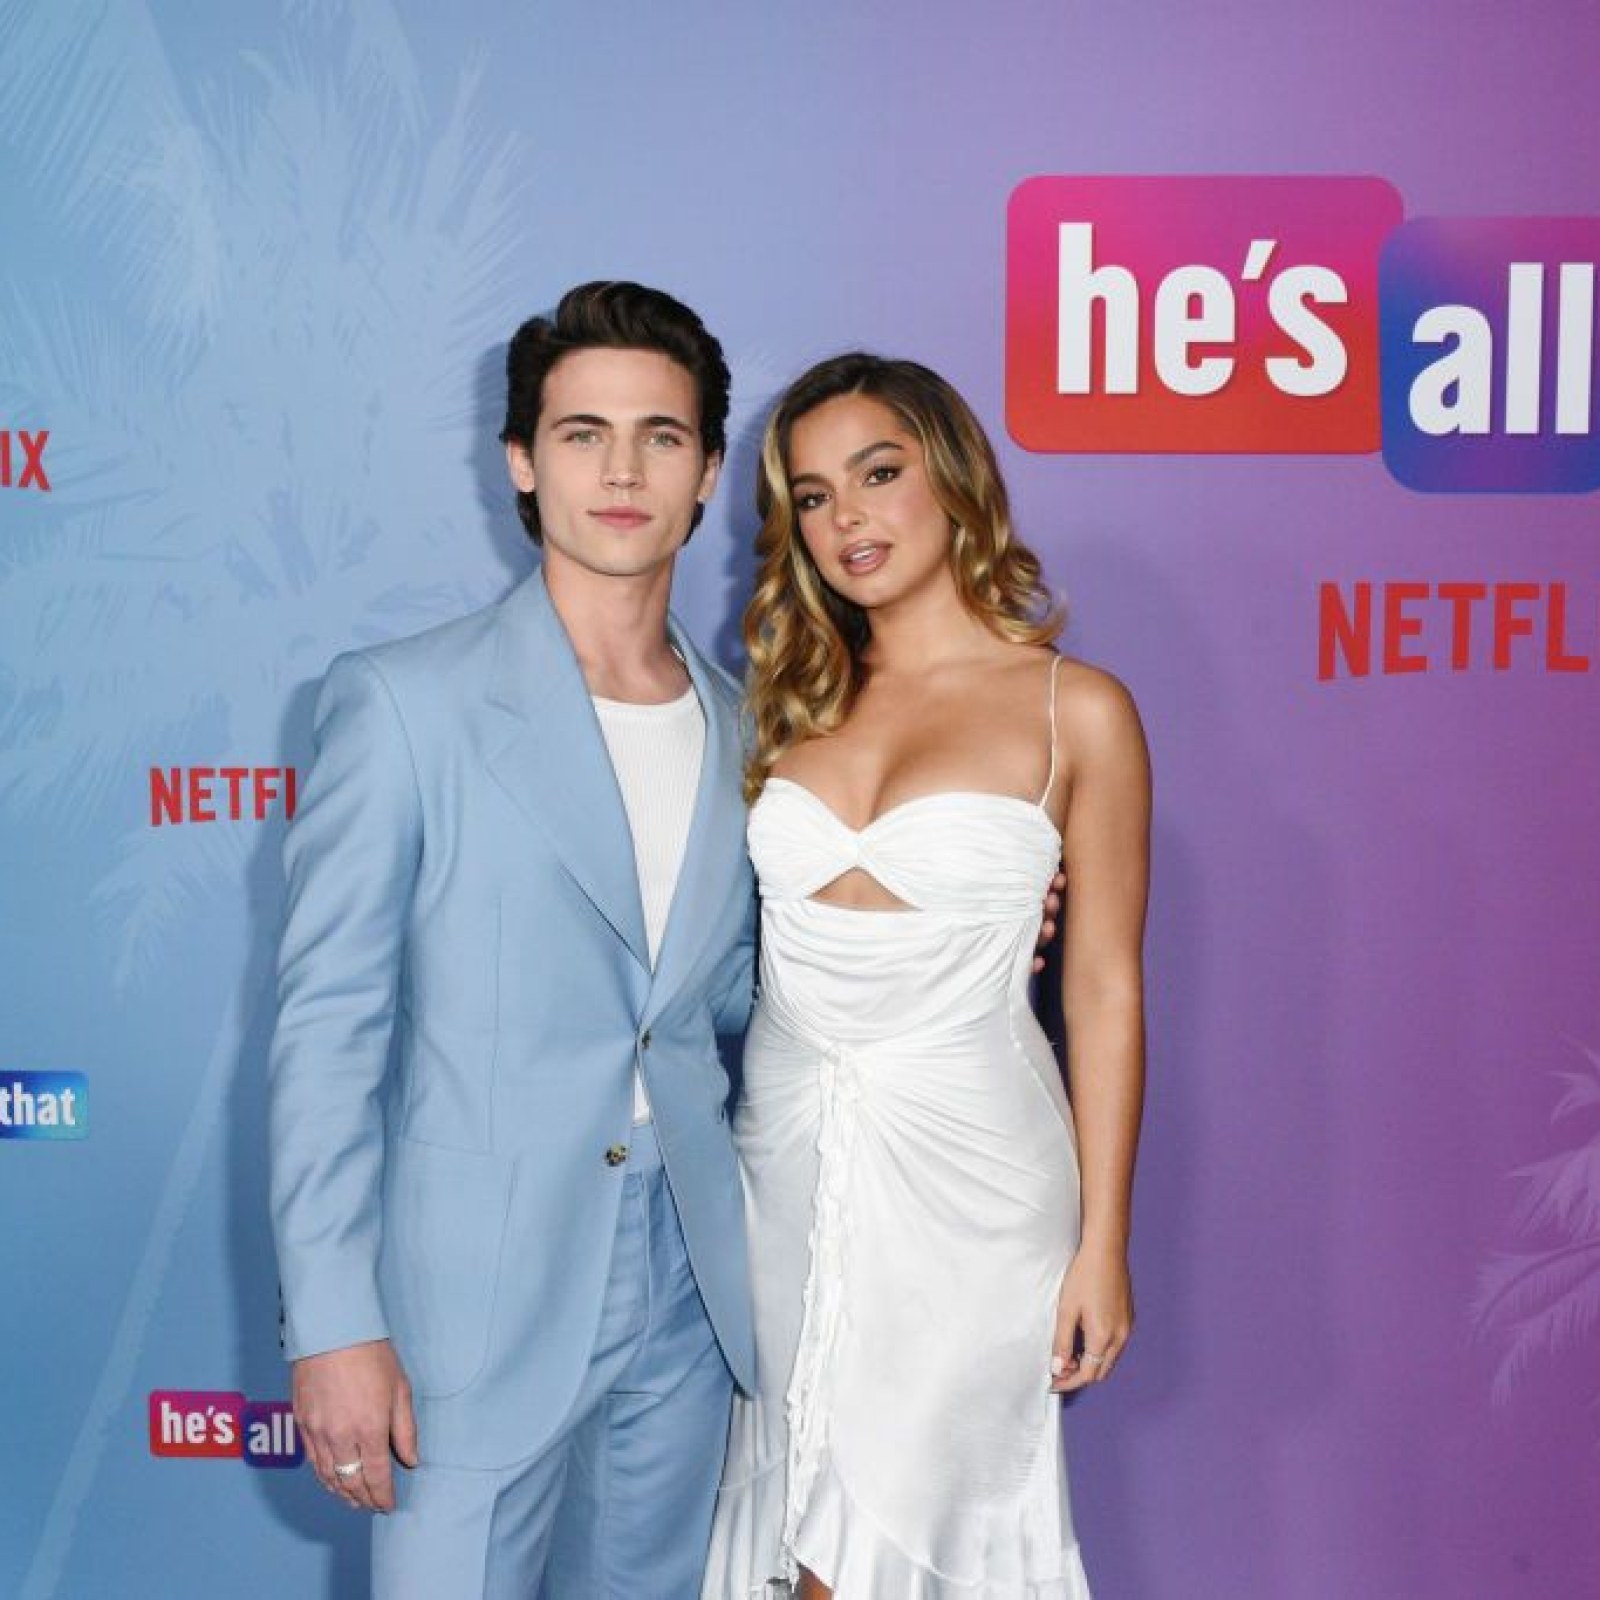 He's All That': Addison Rae Apologizes To Co-Star Tanner Buchanan